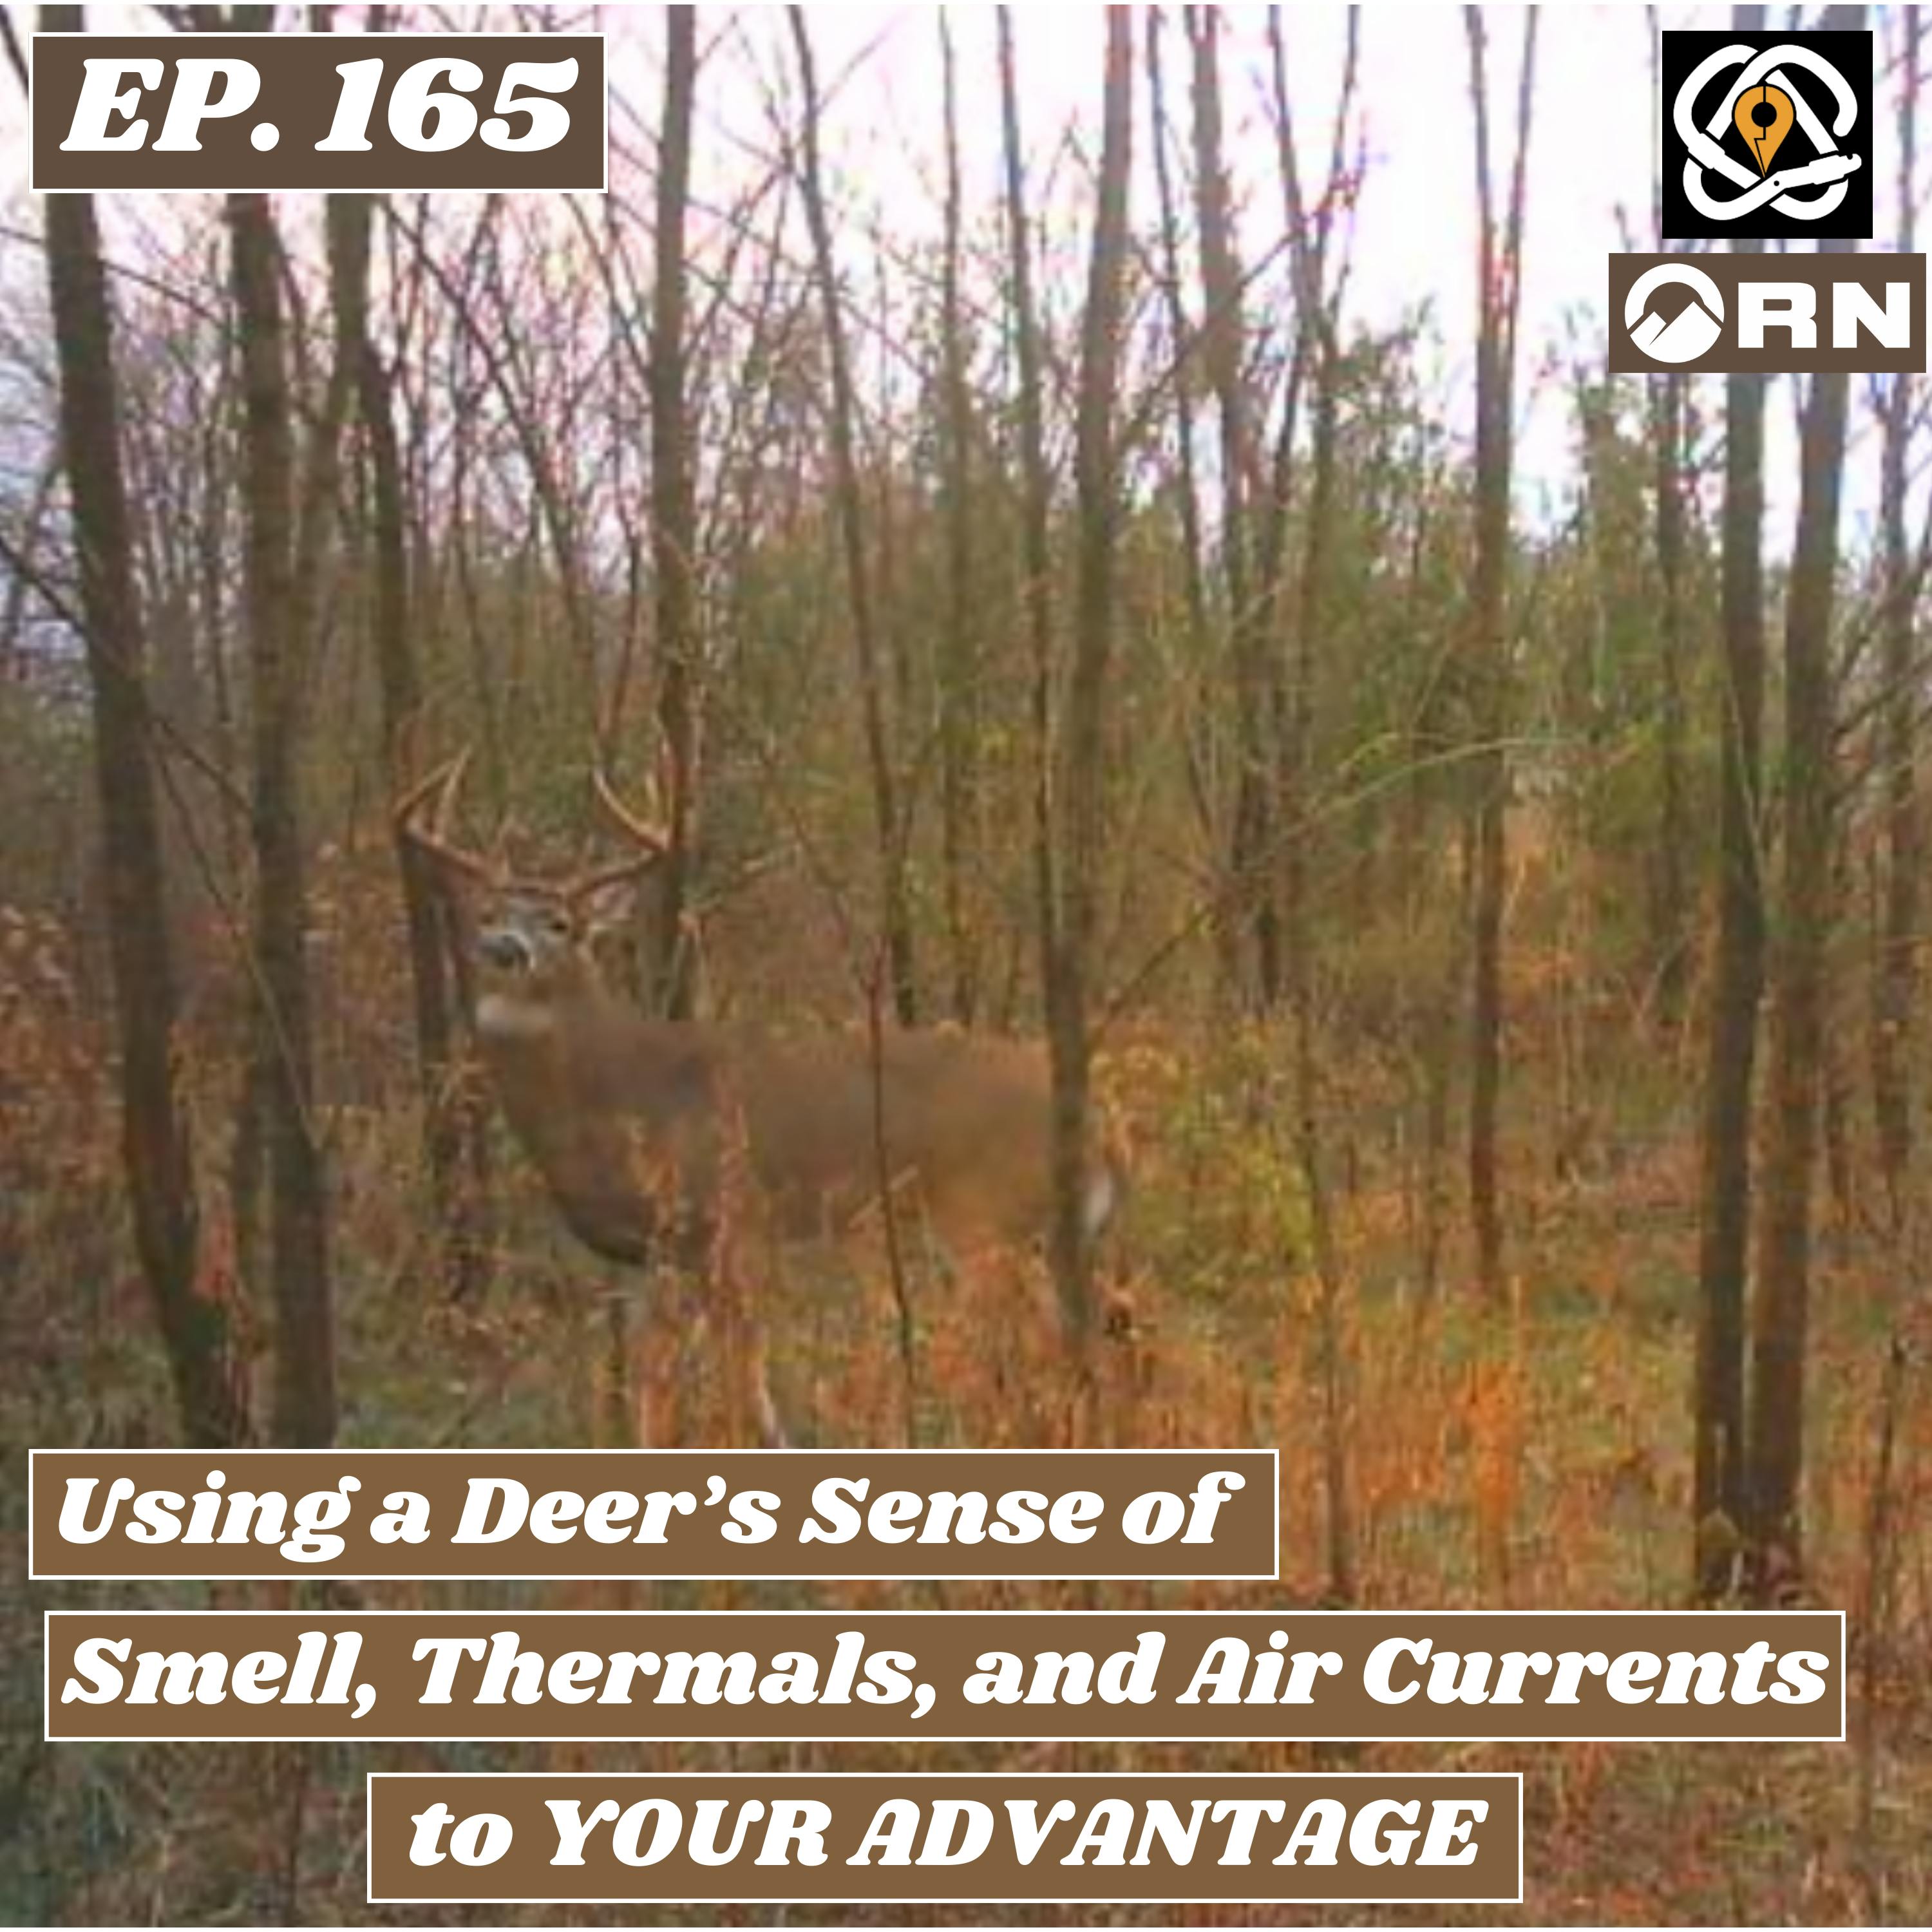 Using a Deer's Sense of Smell, Thermals, and Air Currents to YOUR ADVANTAGE